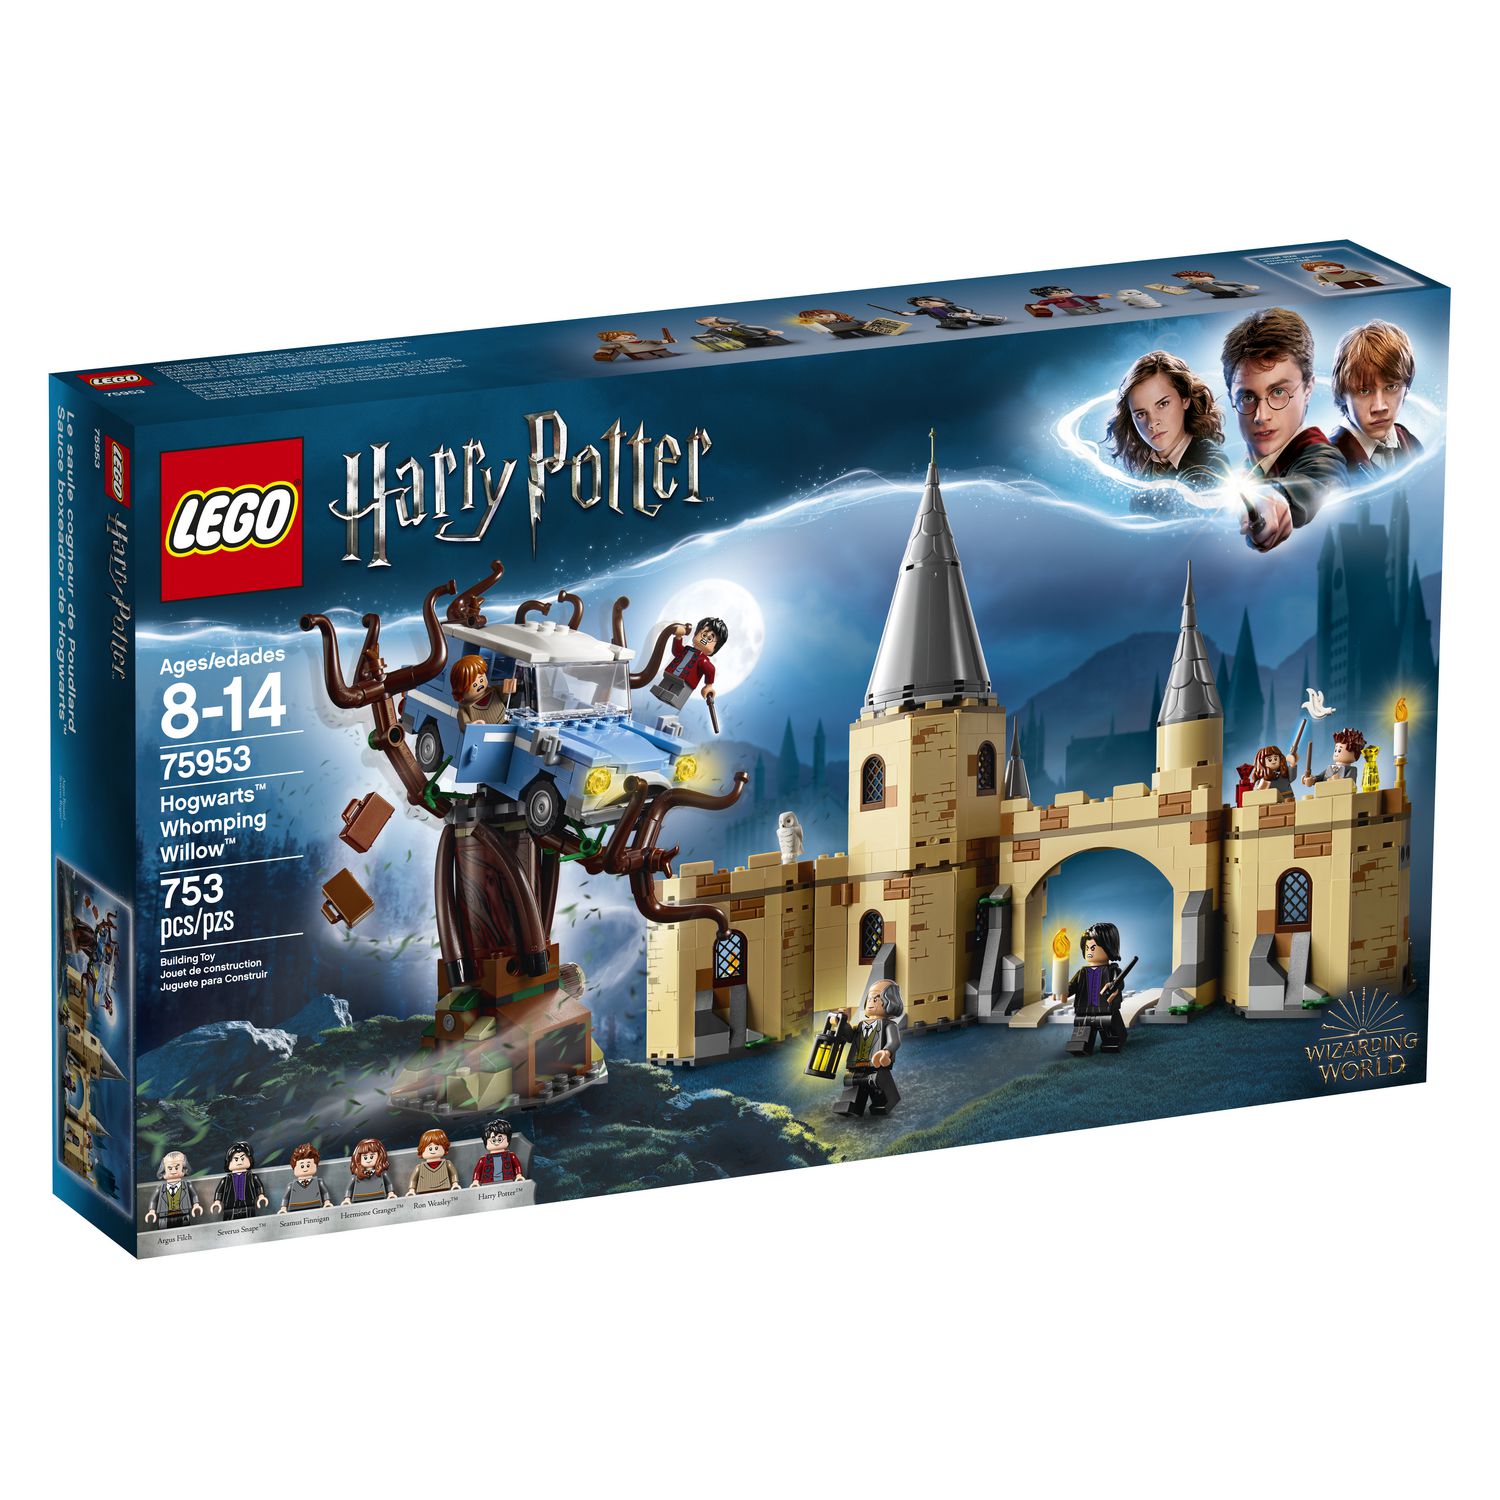 LEGO Harry Potter and the Chamber of Secrets Hogwarts Whomping Willow 75953  Building Kit (753 Piece)